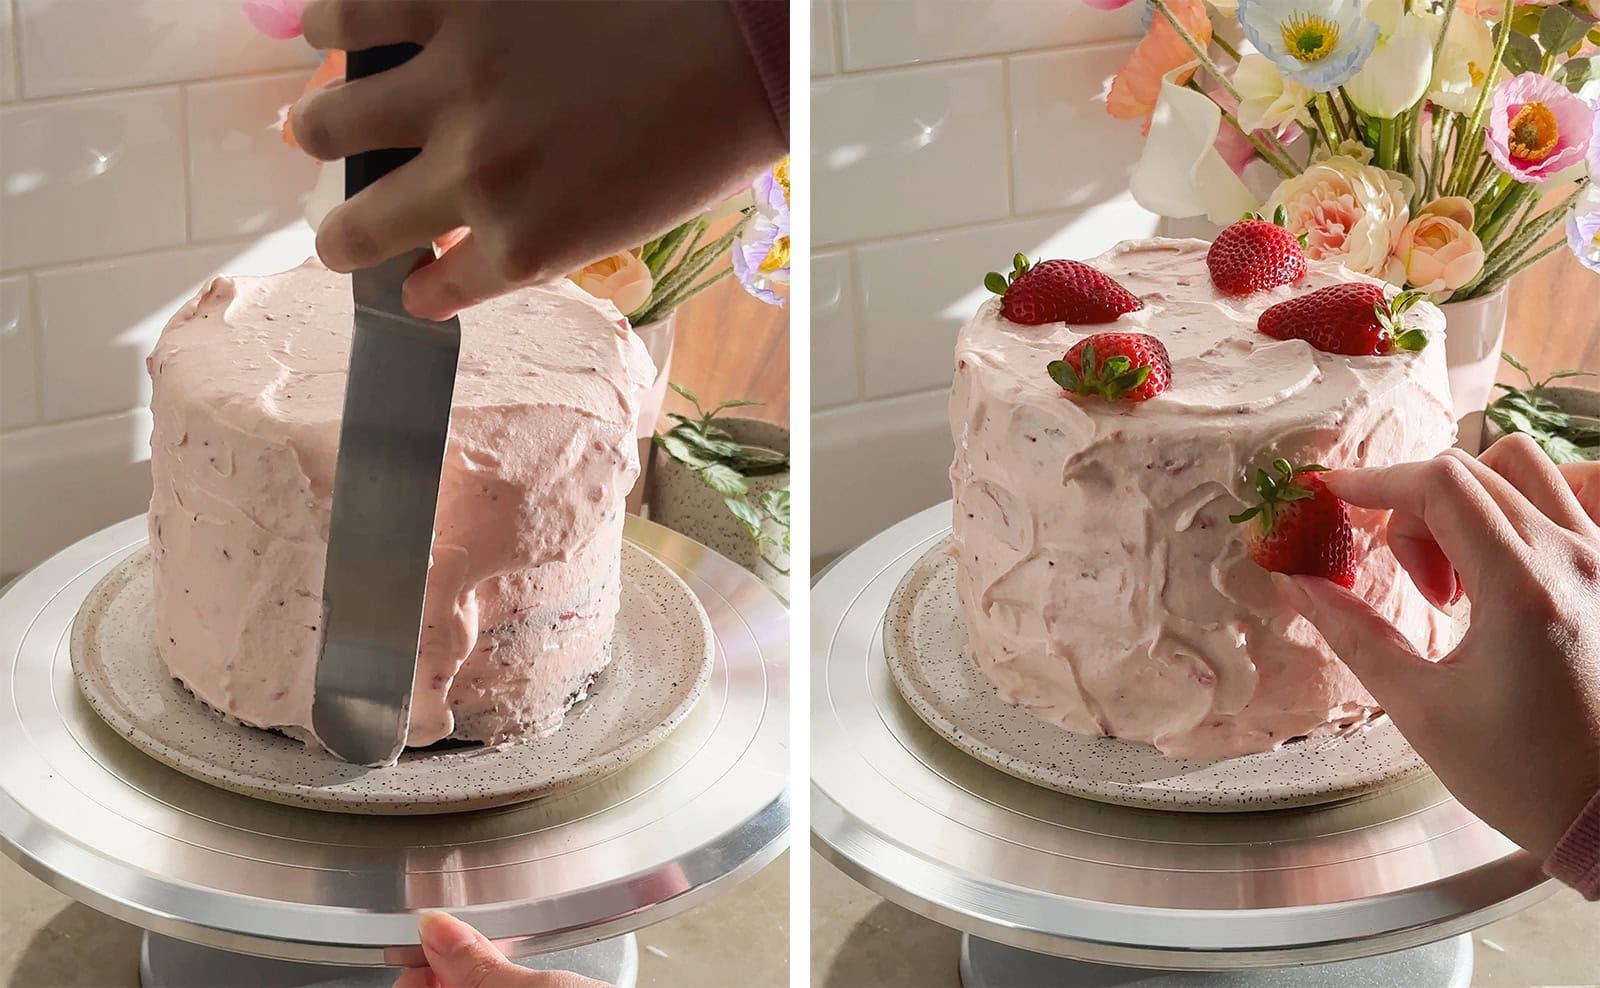 Left to right: spreading frosting on a cake with a spatula, hand placing a strawberry on the side of a cake.